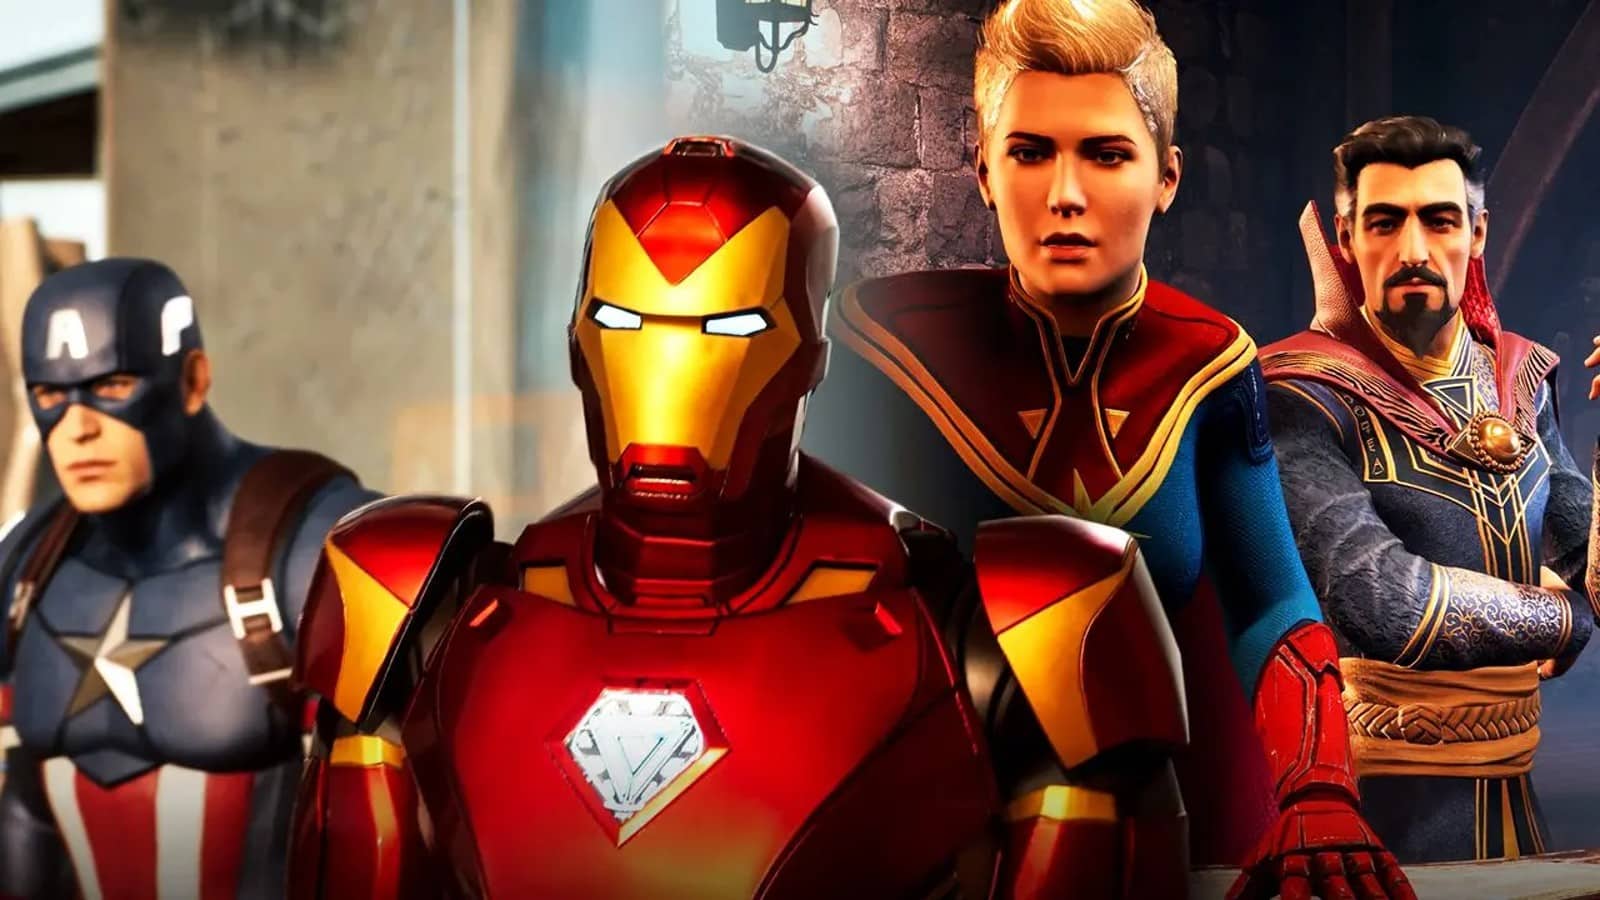 Marvel's Midnight Suns release date stays in 2022 after all